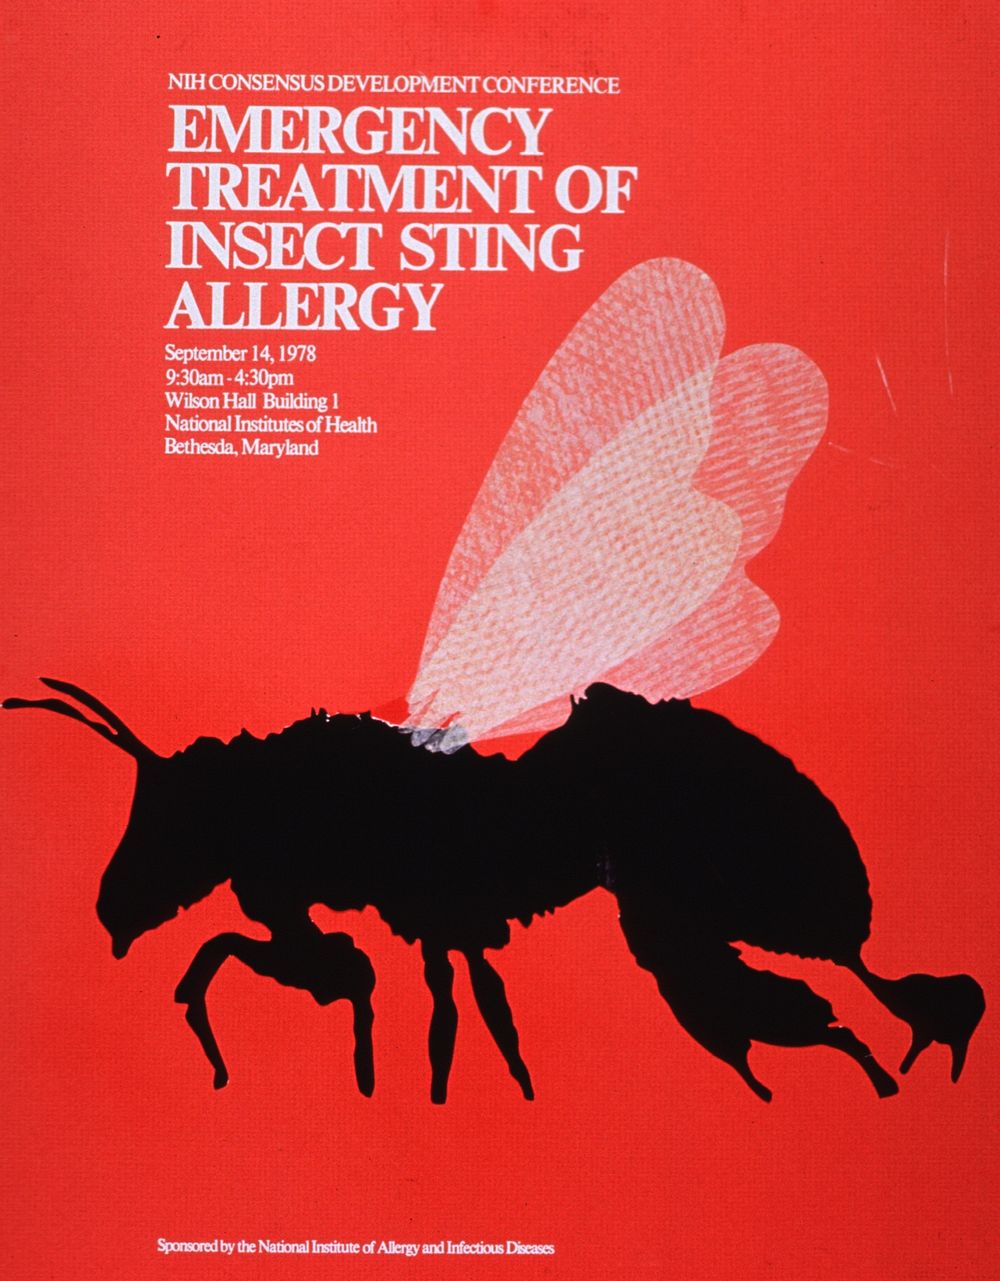 Emergency treatment of insect sting allergy. Orange poster with white lettering announcing Consensus Development Conference…